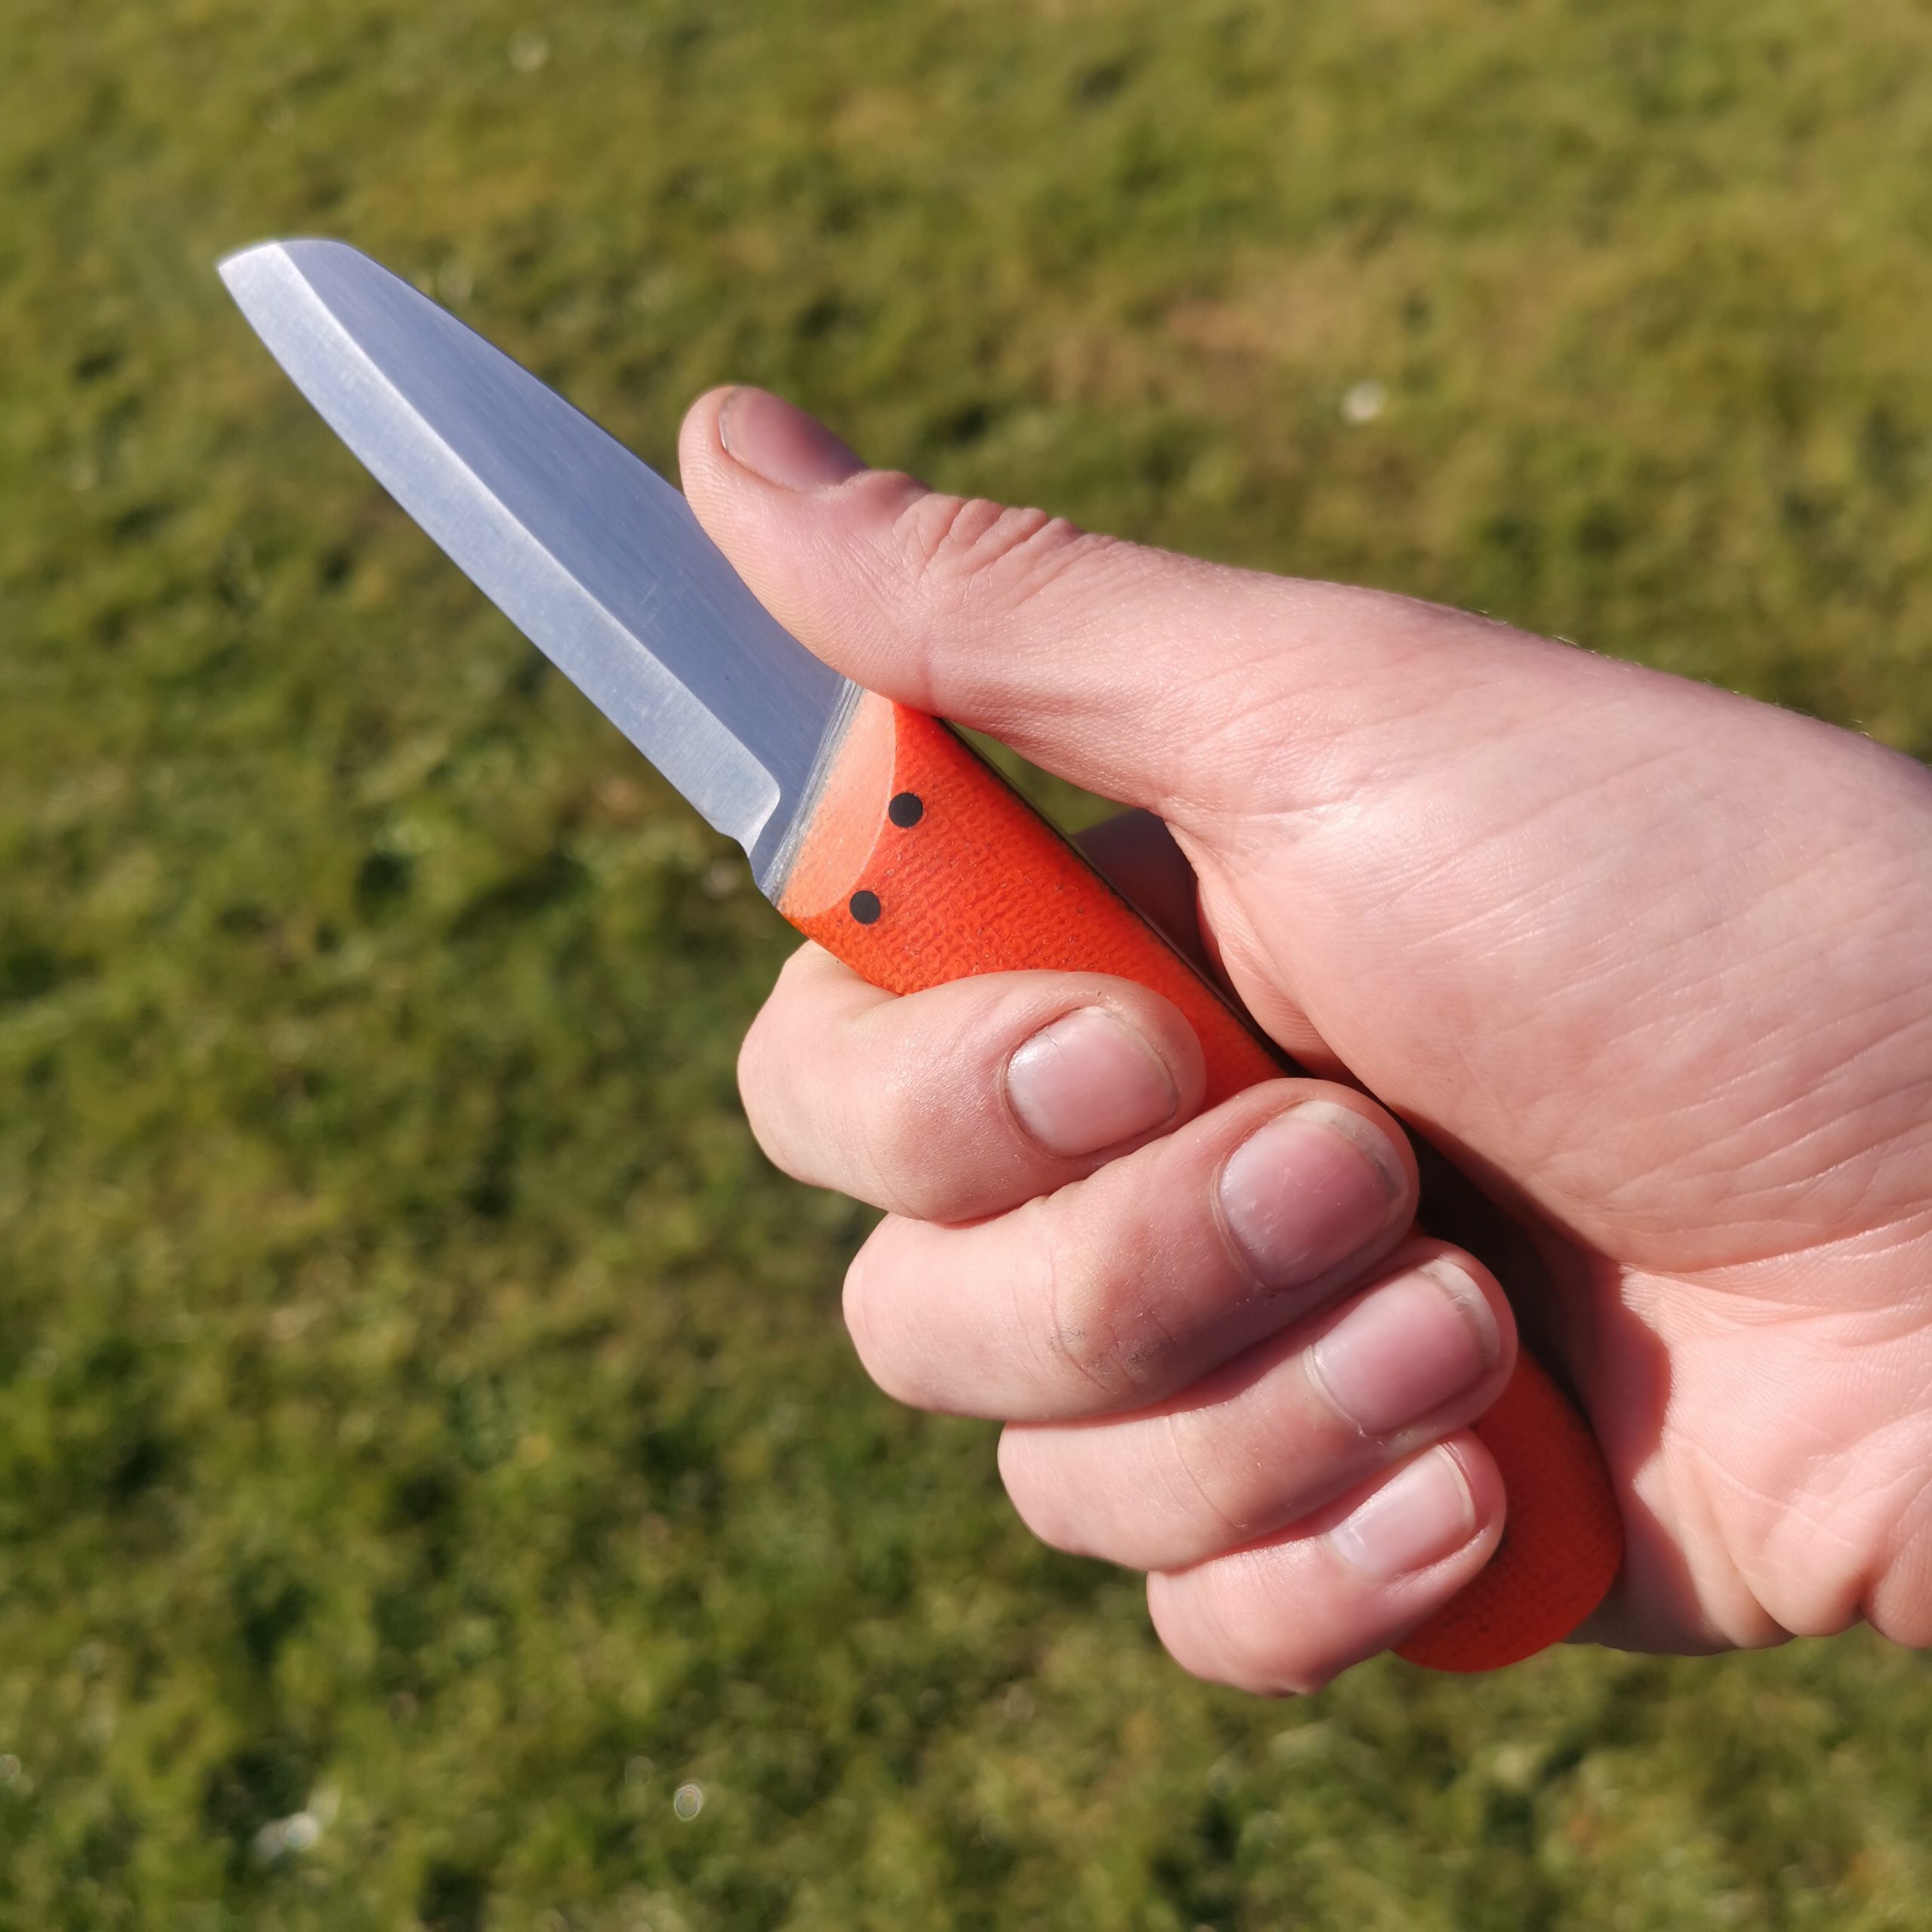 General Purpose Knife in Hand